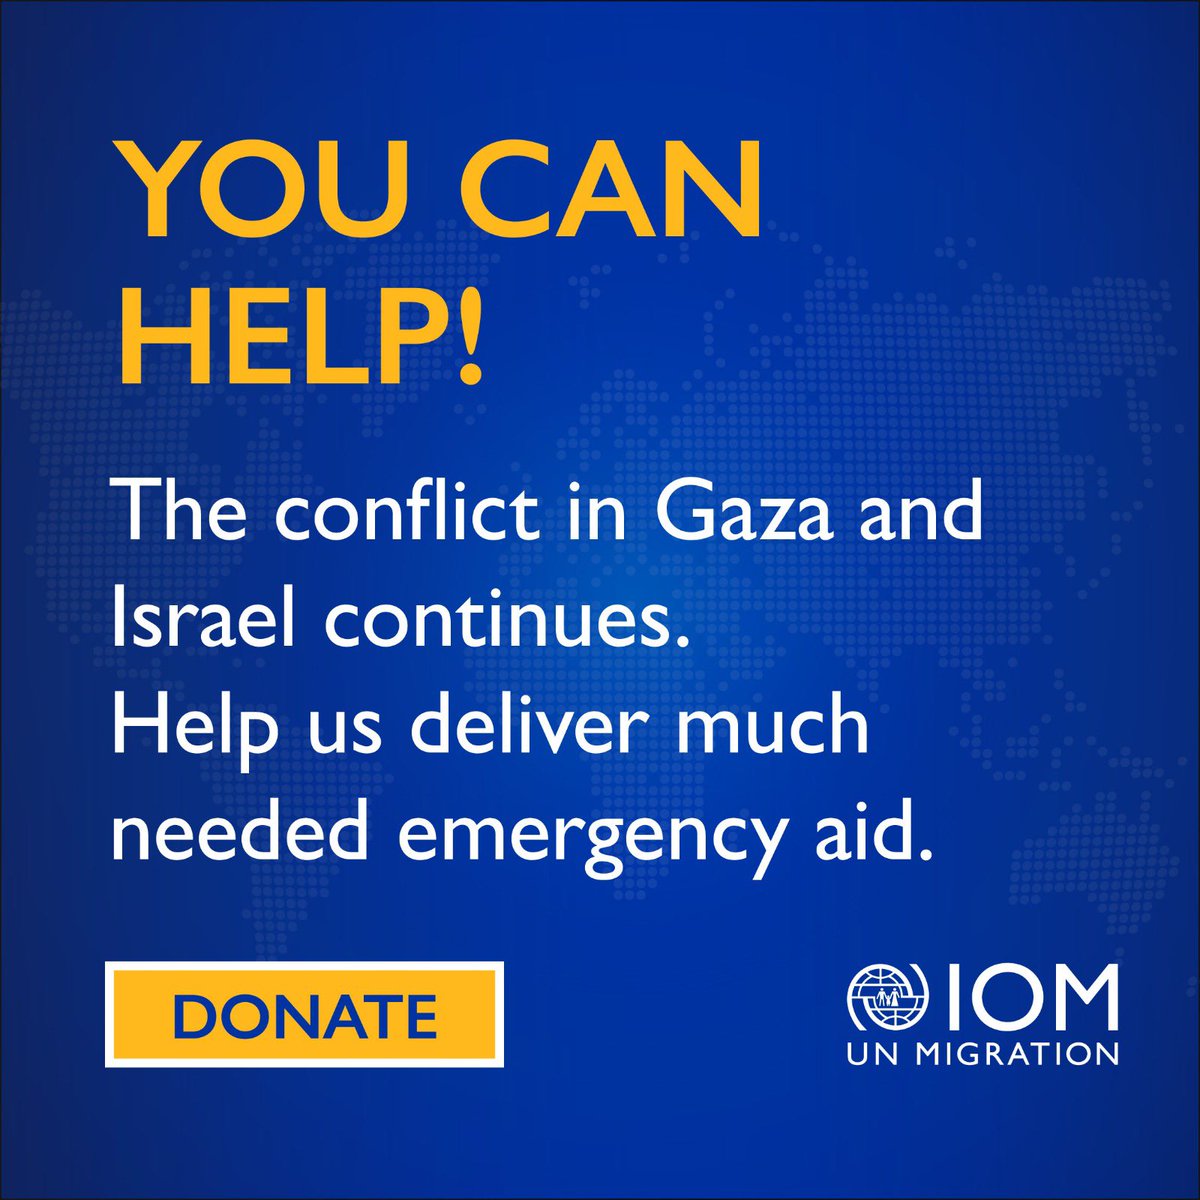 Thousands have been killed and hundreds of thousands have been internally displaced in the Gaza Strip. IOM stands ready to support humanitarian efforts. We need your help today! Your support is critical in our mission to deliver emergency aid. Donate: donate.iom.int/gaza